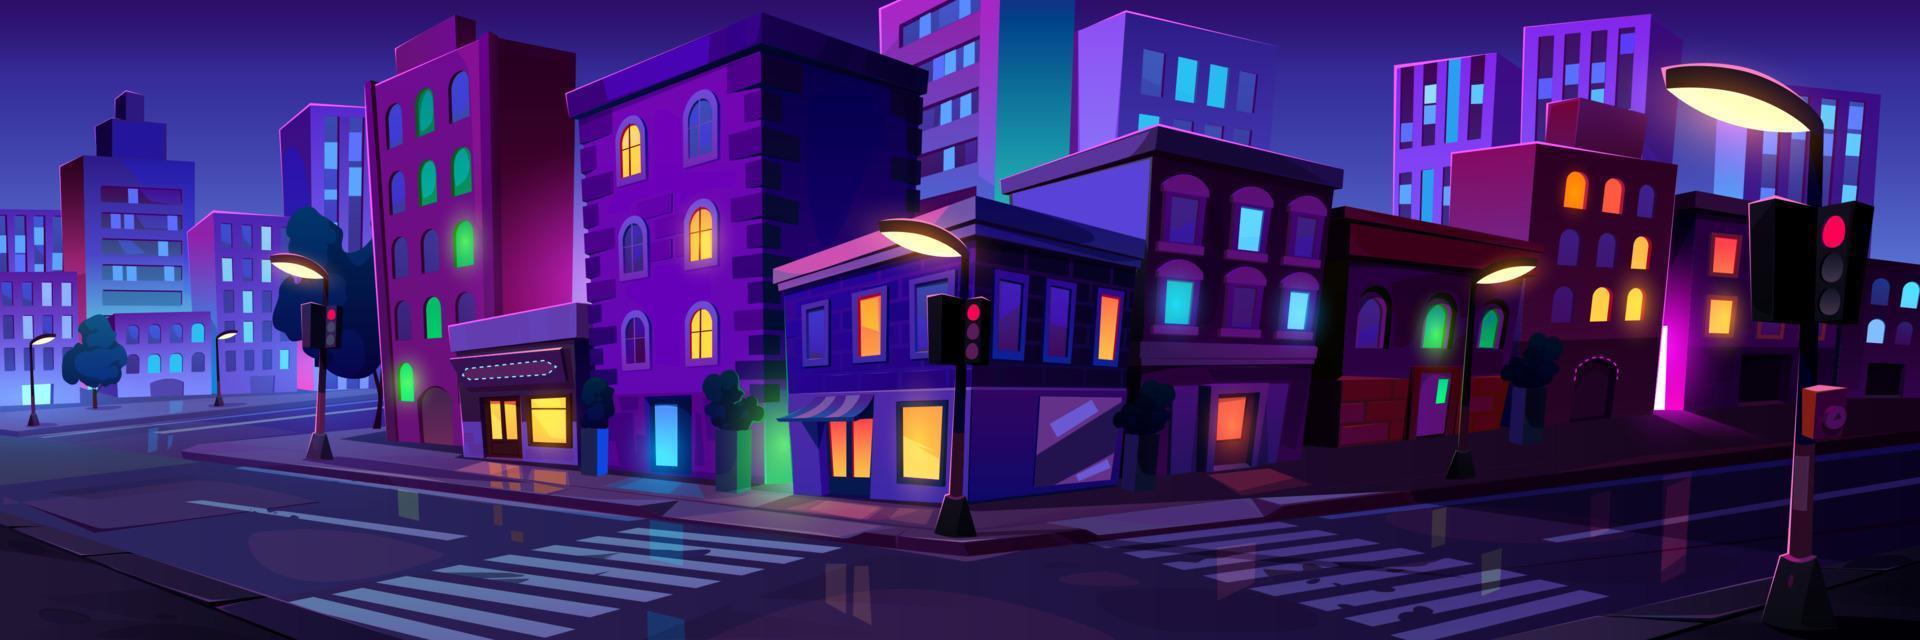 City crossroad at night, transport intersection vector